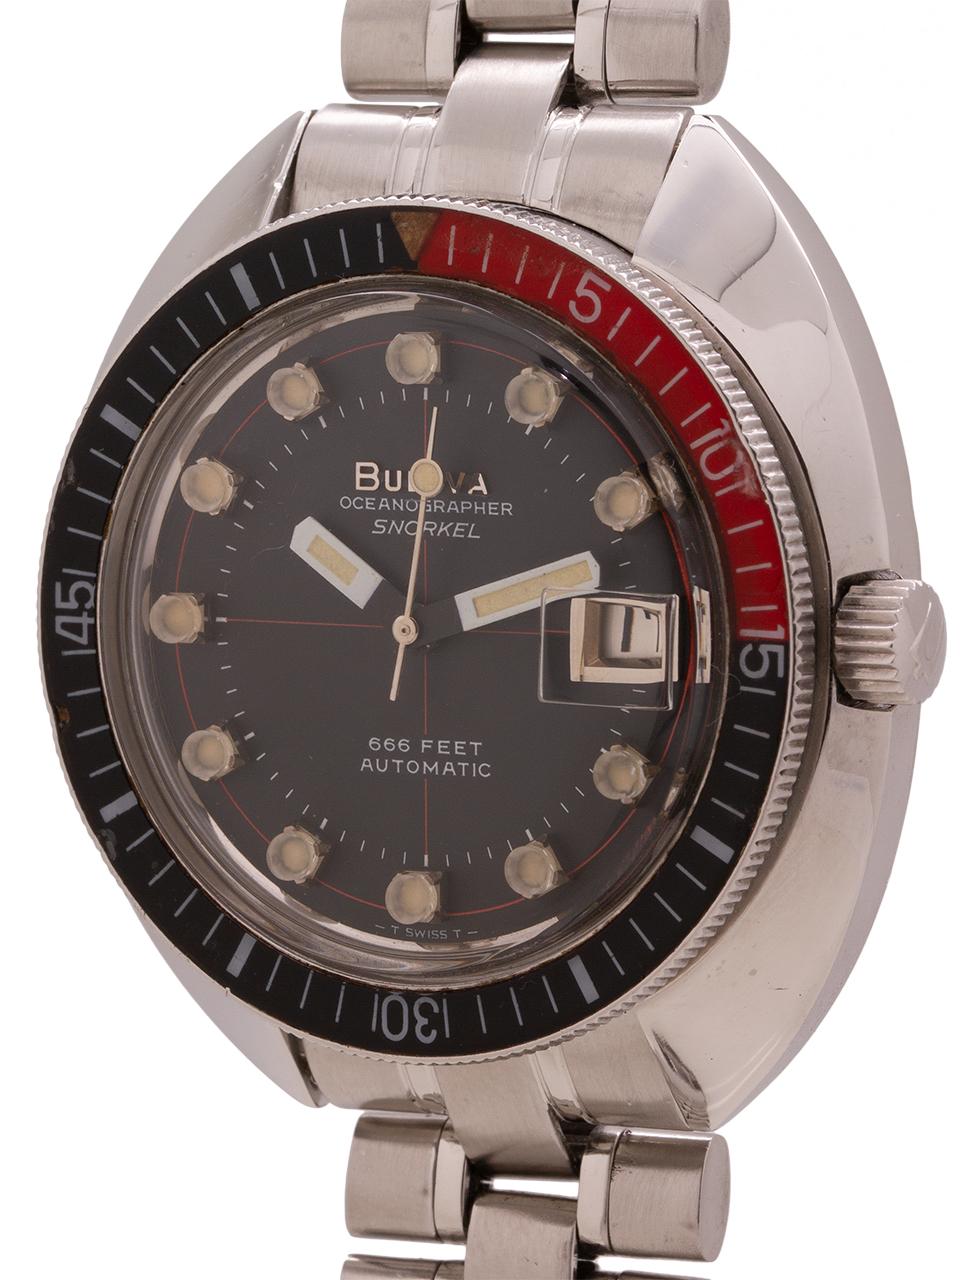 
Bulova Oceanographer Snorkel 666 in stainless steel, circa 1969 diver's model. Featuring 40.5 x 43.5mm tonneau shaped case with black original dial with prominent acrylic pedestal style indexes, printed cross hairs and applied Bulova logo. Self